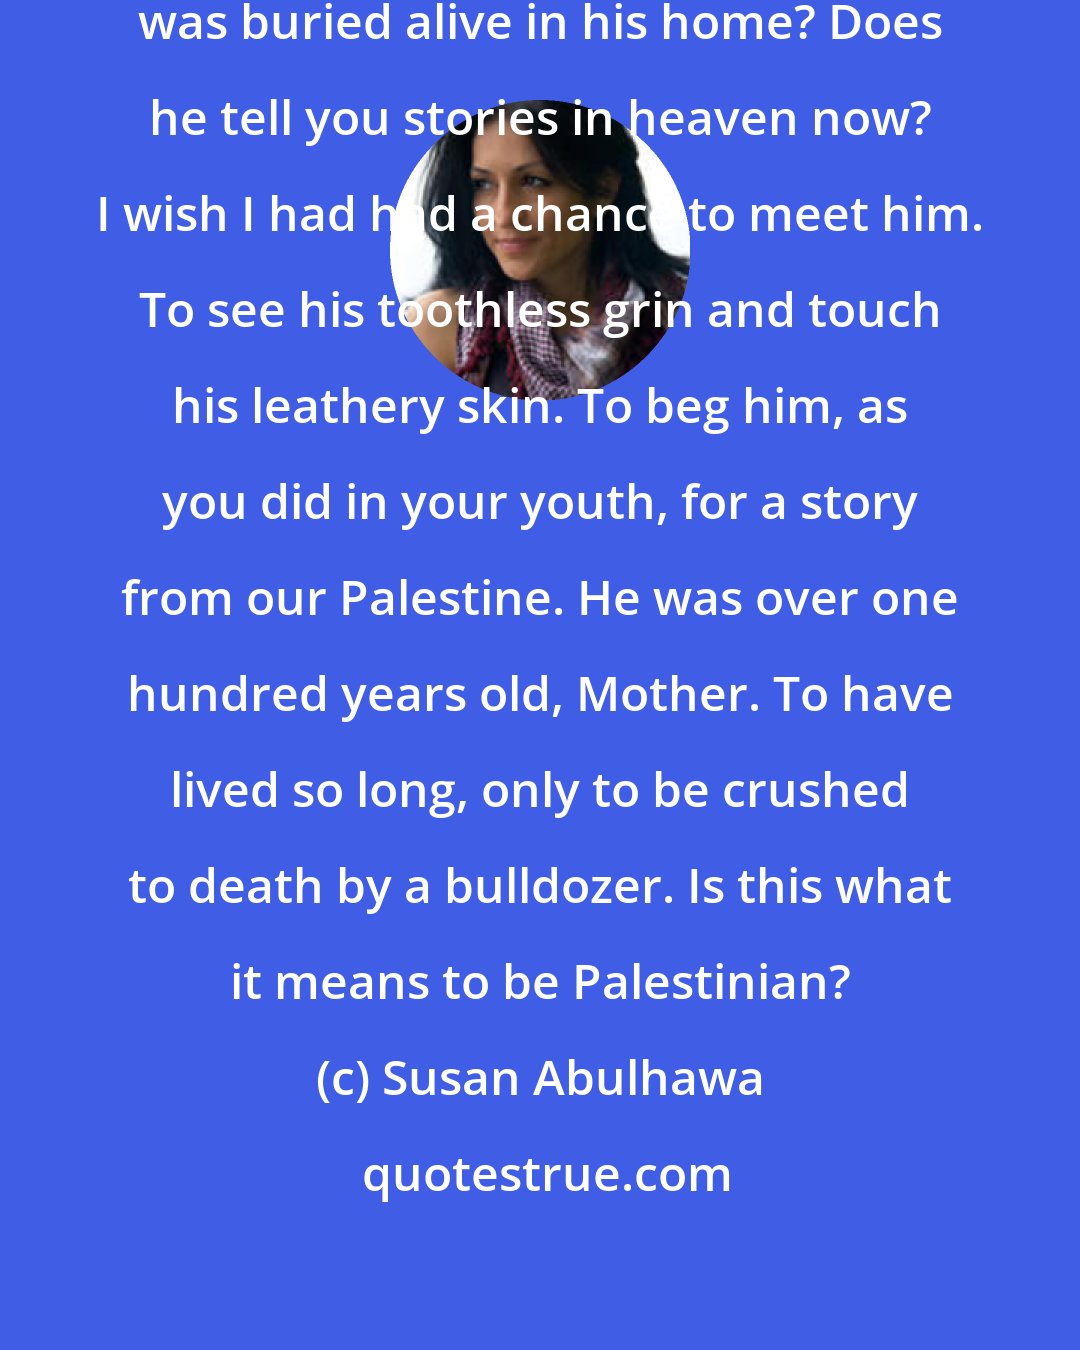 Susan Abulhawa: Do you know, Mother, that Haj Salem was buried alive in his home? Does he tell you stories in heaven now? I wish I had had a chance to meet him. To see his toothless grin and touch his leathery skin. To beg him, as you did in your youth, for a story from our Palestine. He was over one hundred years old, Mother. To have lived so long, only to be crushed to death by a bulldozer. Is this what it means to be Palestinian?